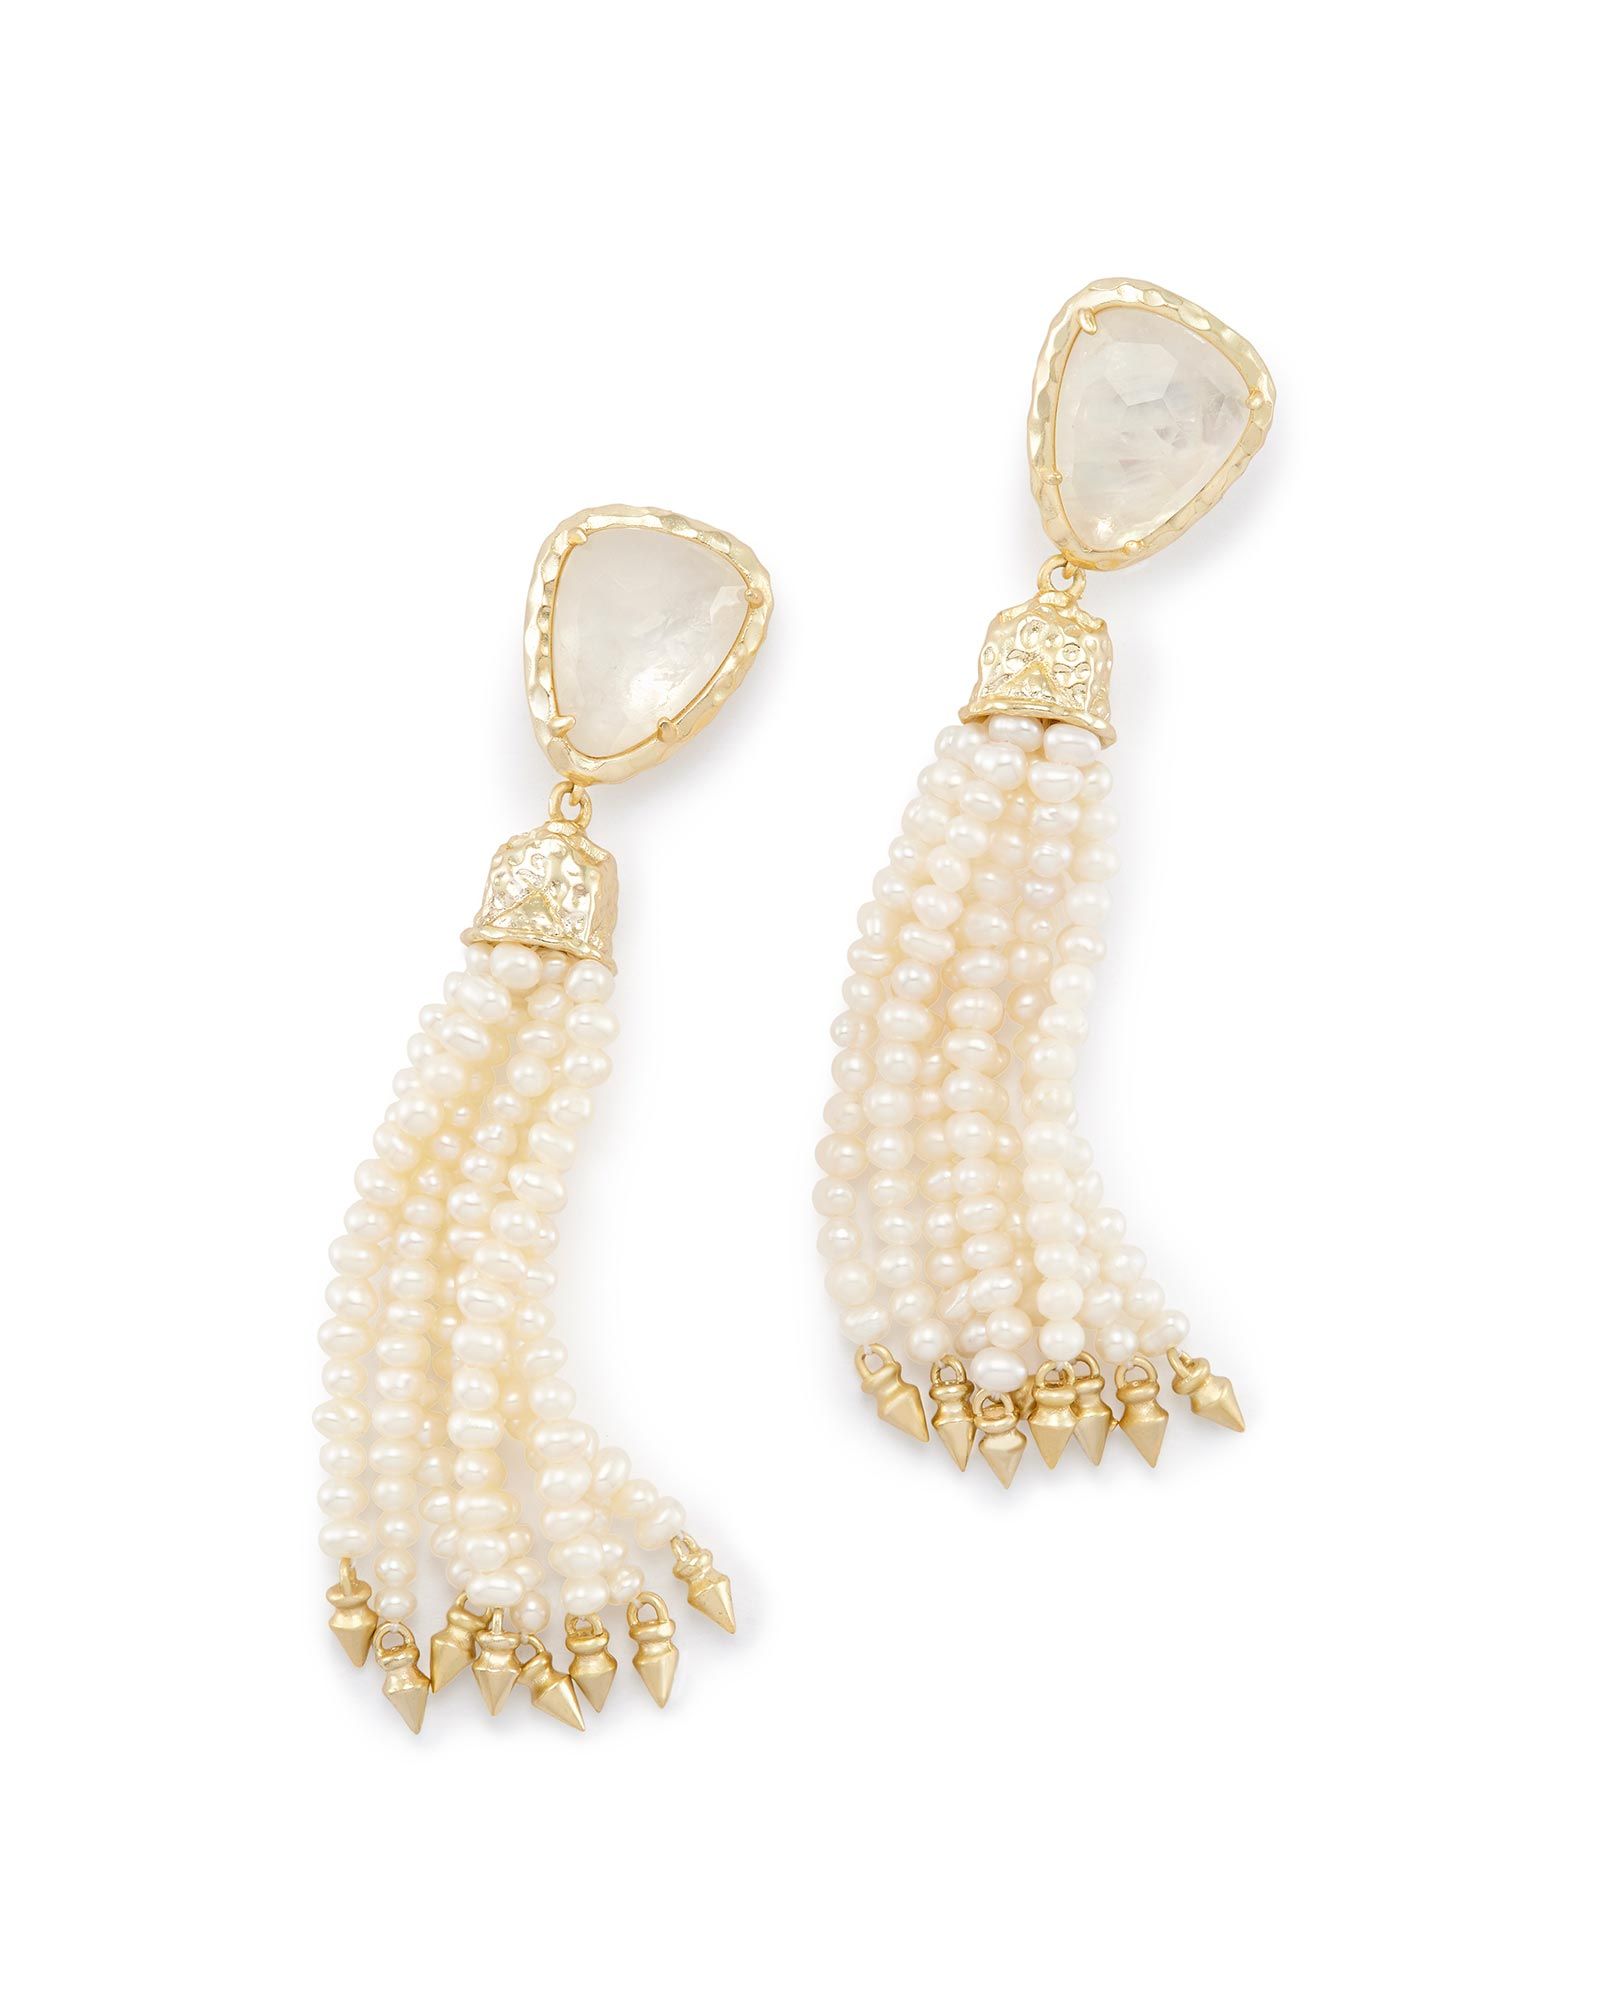 Blossom Statement Earrings in Crystal Ivory Illusion | Kendra Scott